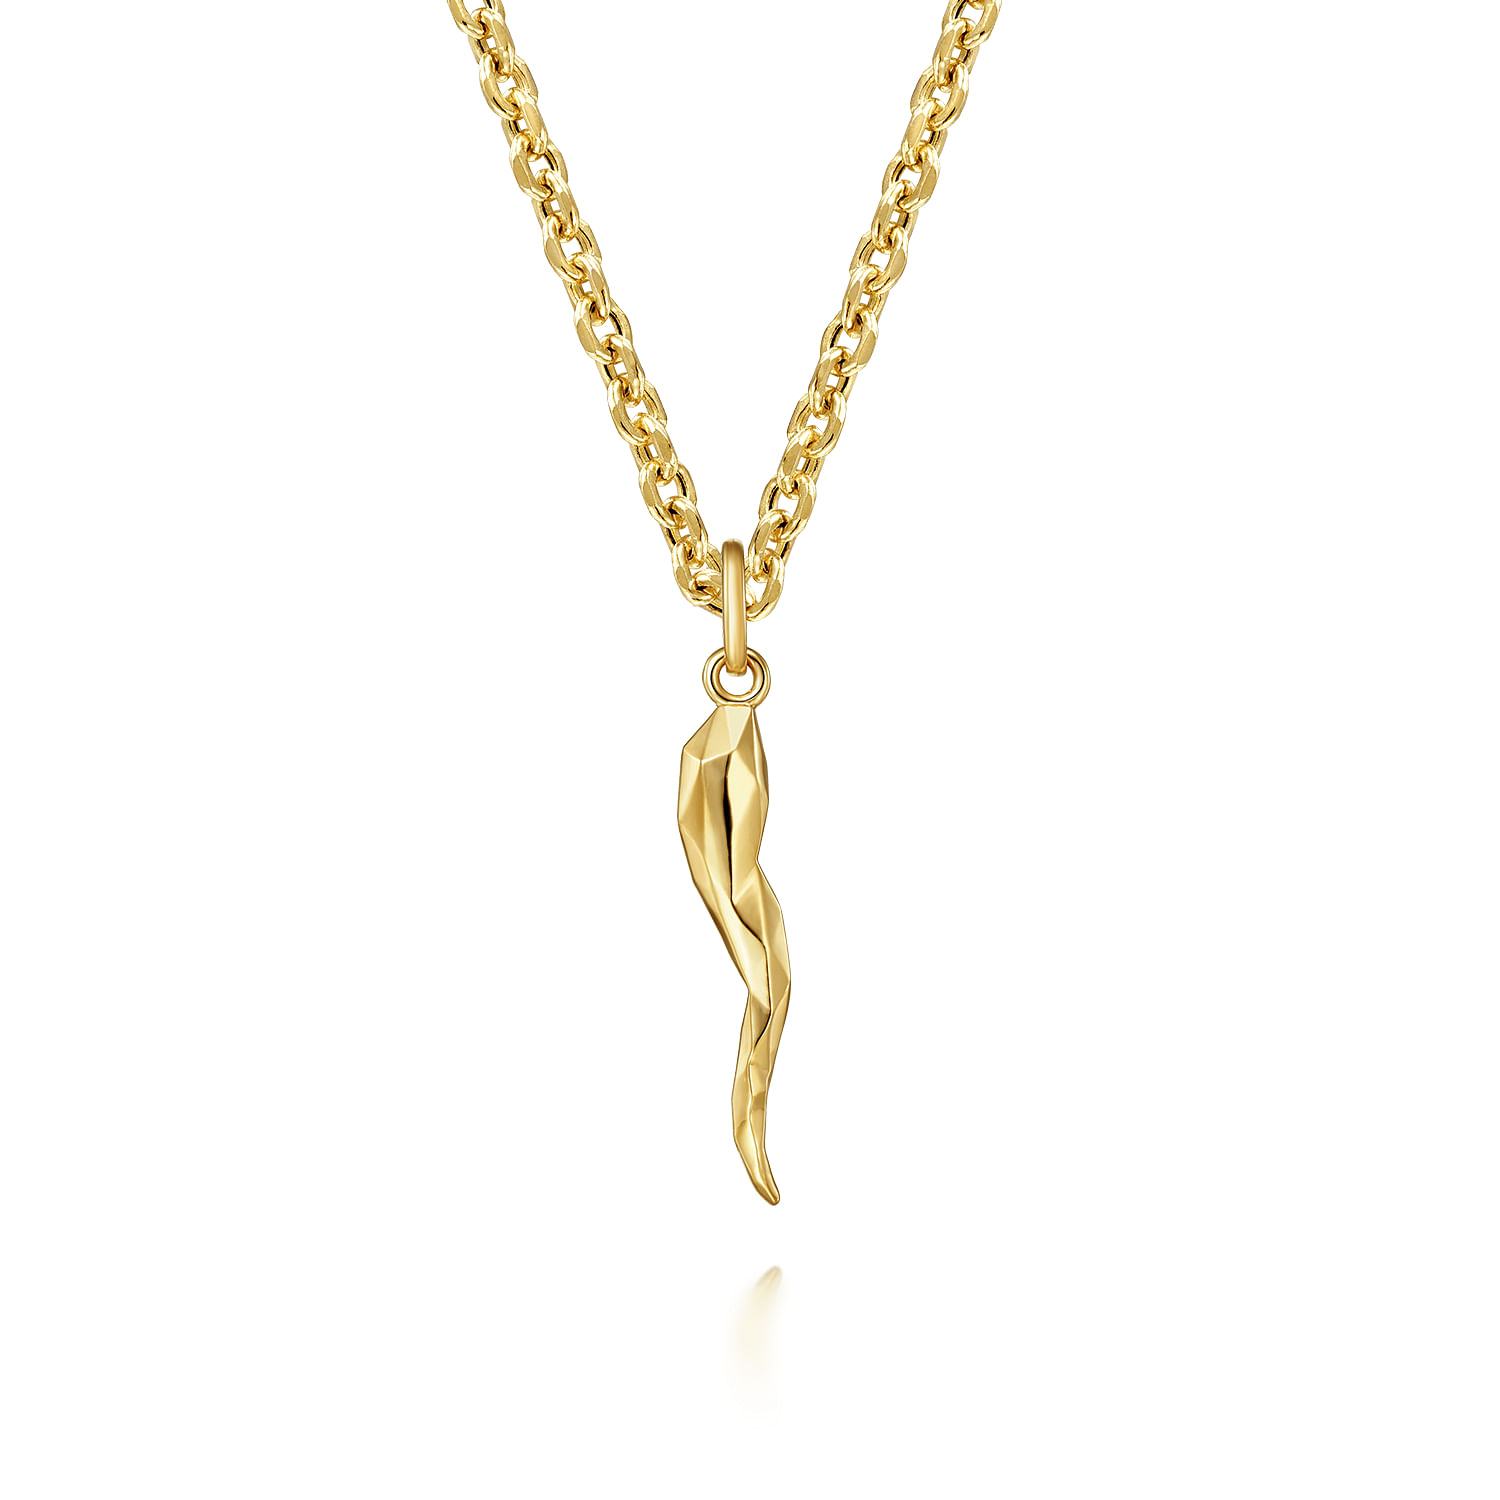 Gabriel - 22 Inch 14K Yellow Gold Chain and Italian Horn Pendant Necklace